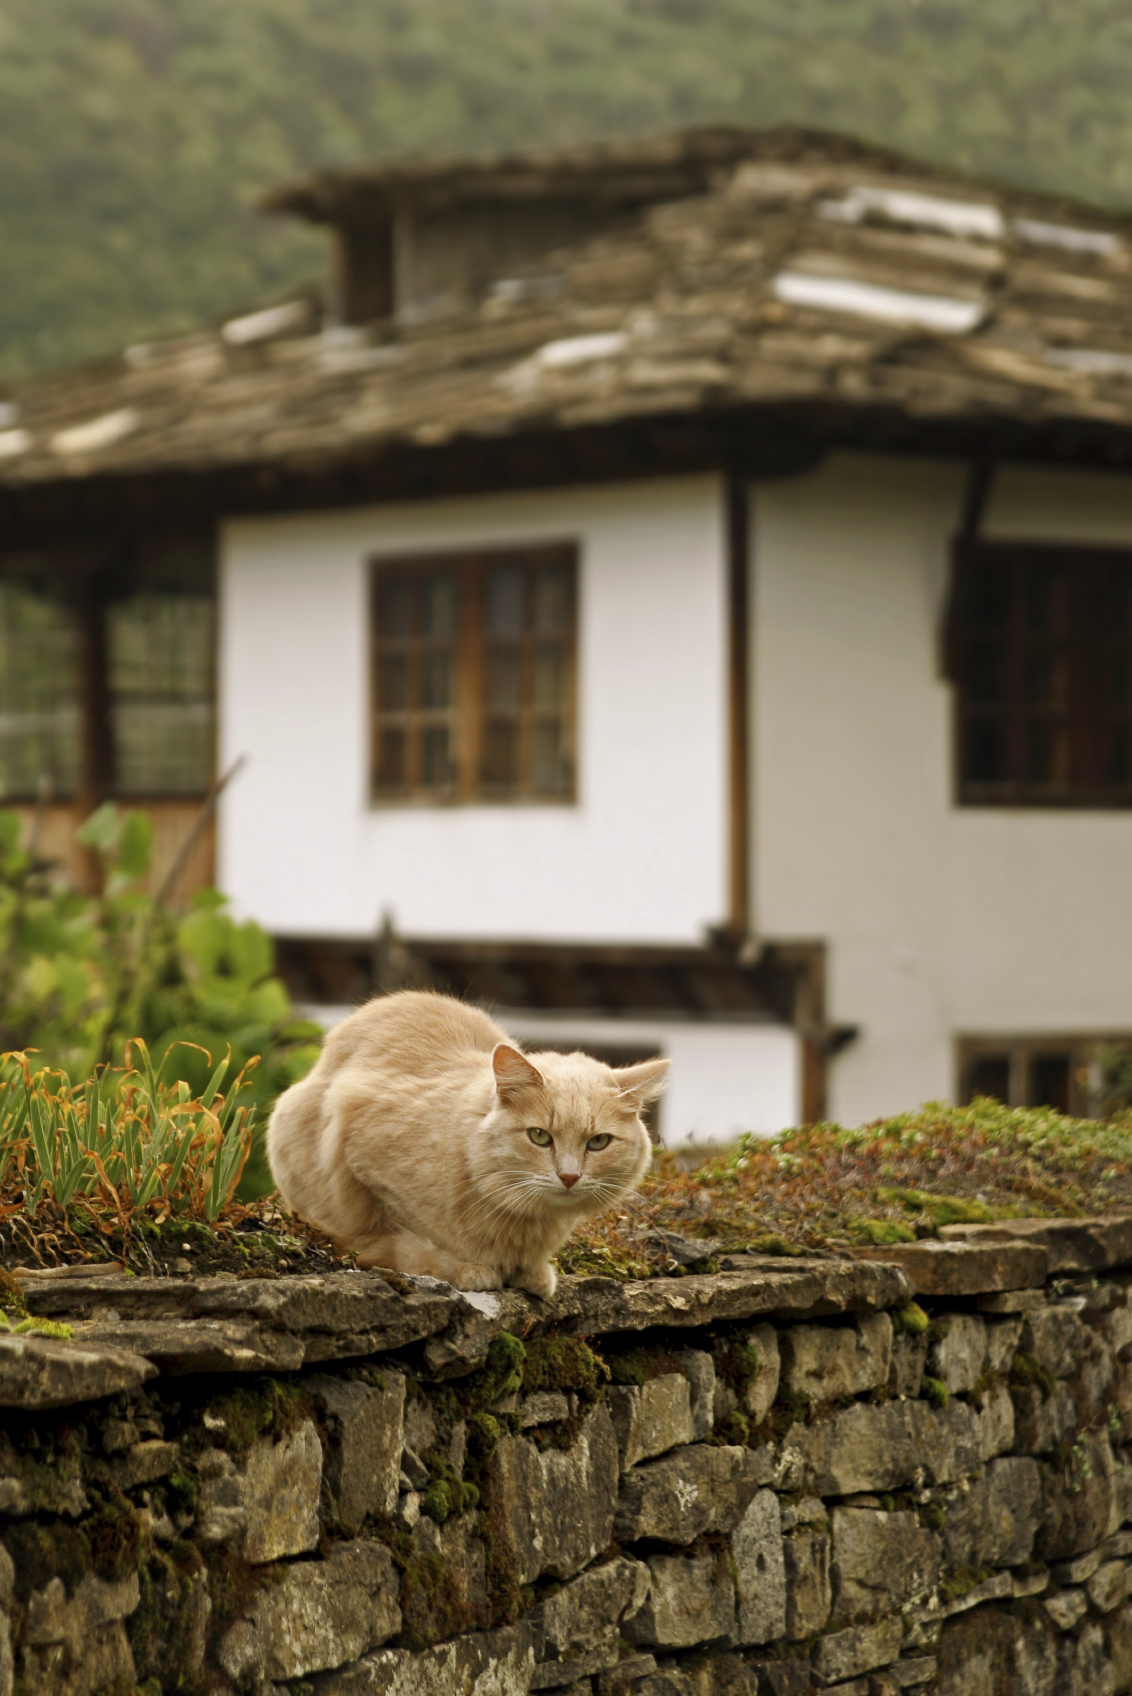 cat outside in a yard on a stone fence